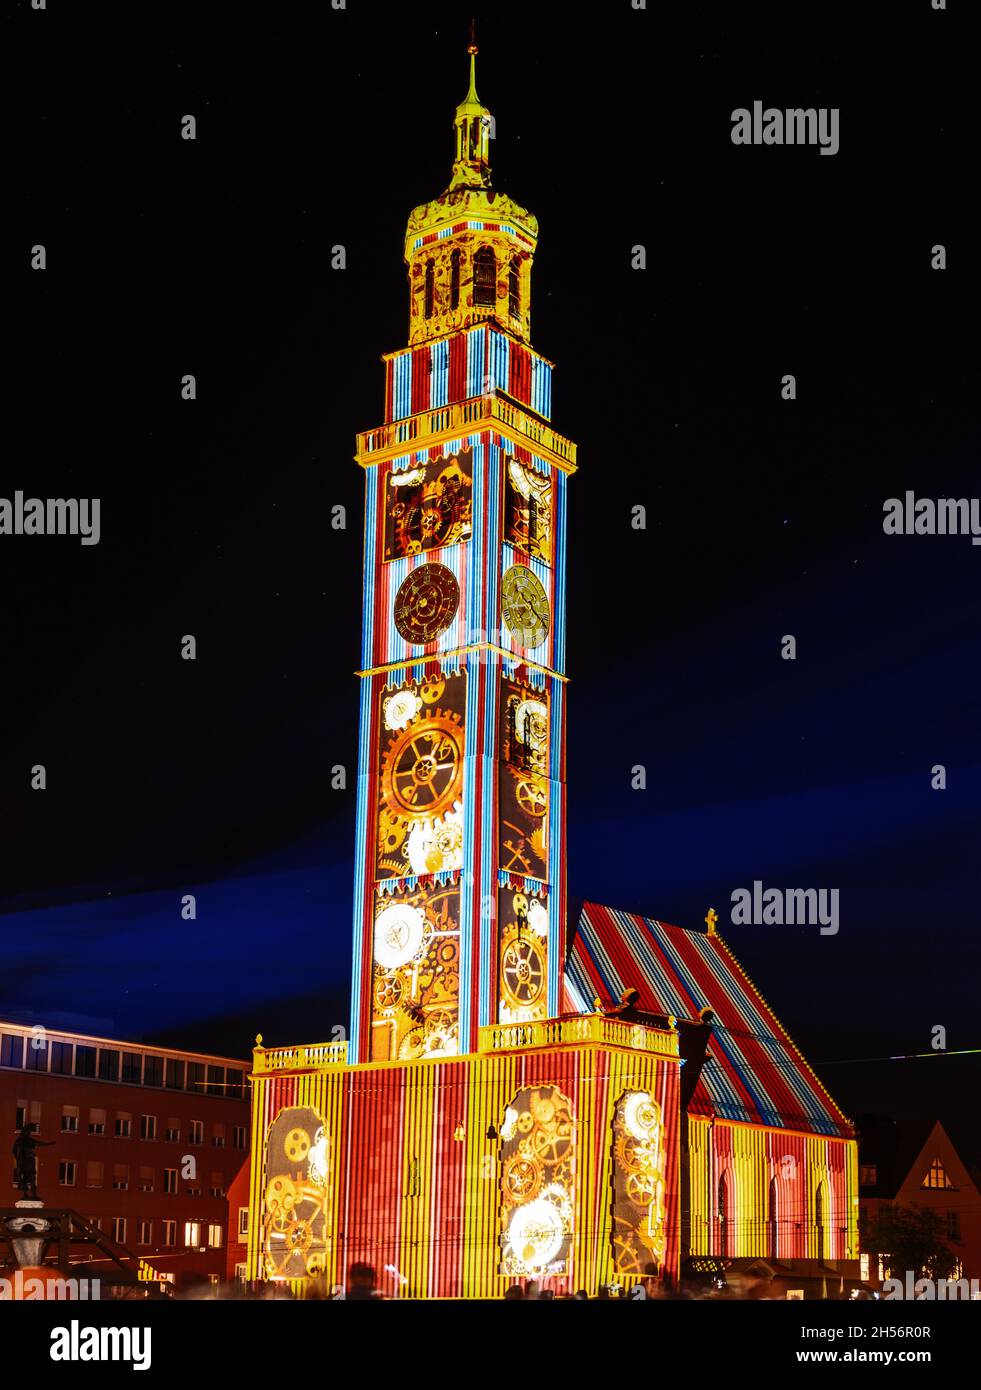 AUGSBURG, GERMANY - OCTOBER 24: Illuminated historic Perlach tower at the festival of lights in Augsburg, Germany on October 24, 2021 Stock Photo